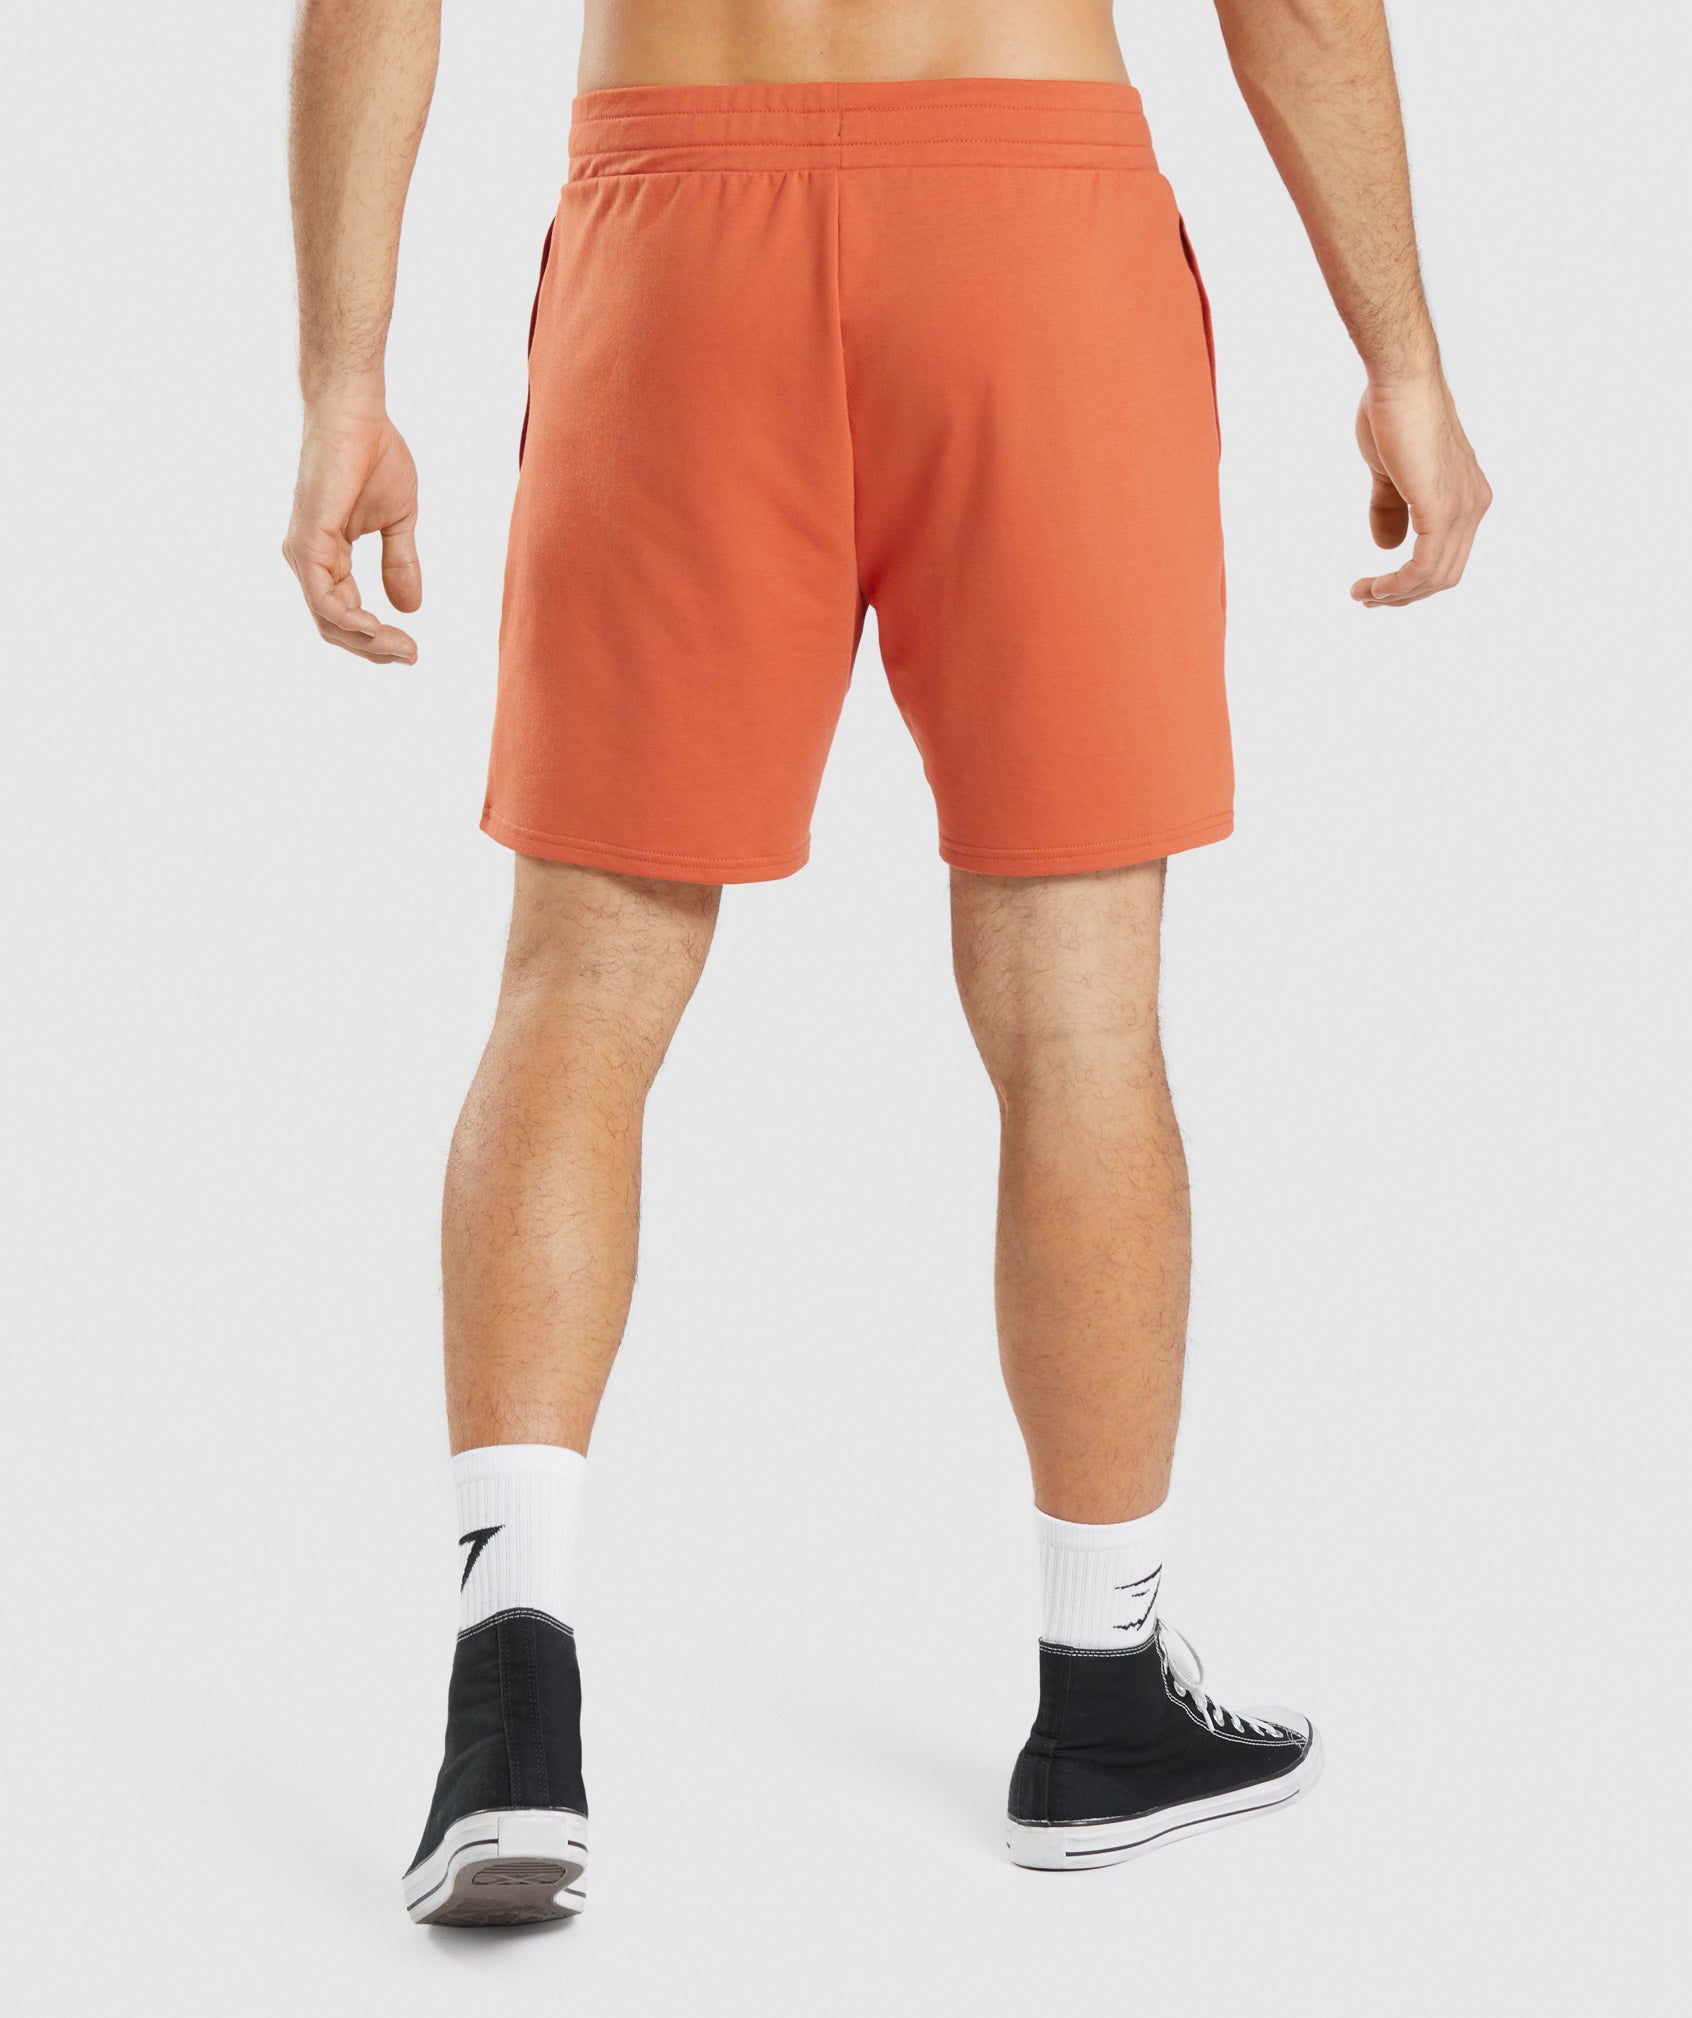 Critical 7" Shorts in Clay Orange - view 2